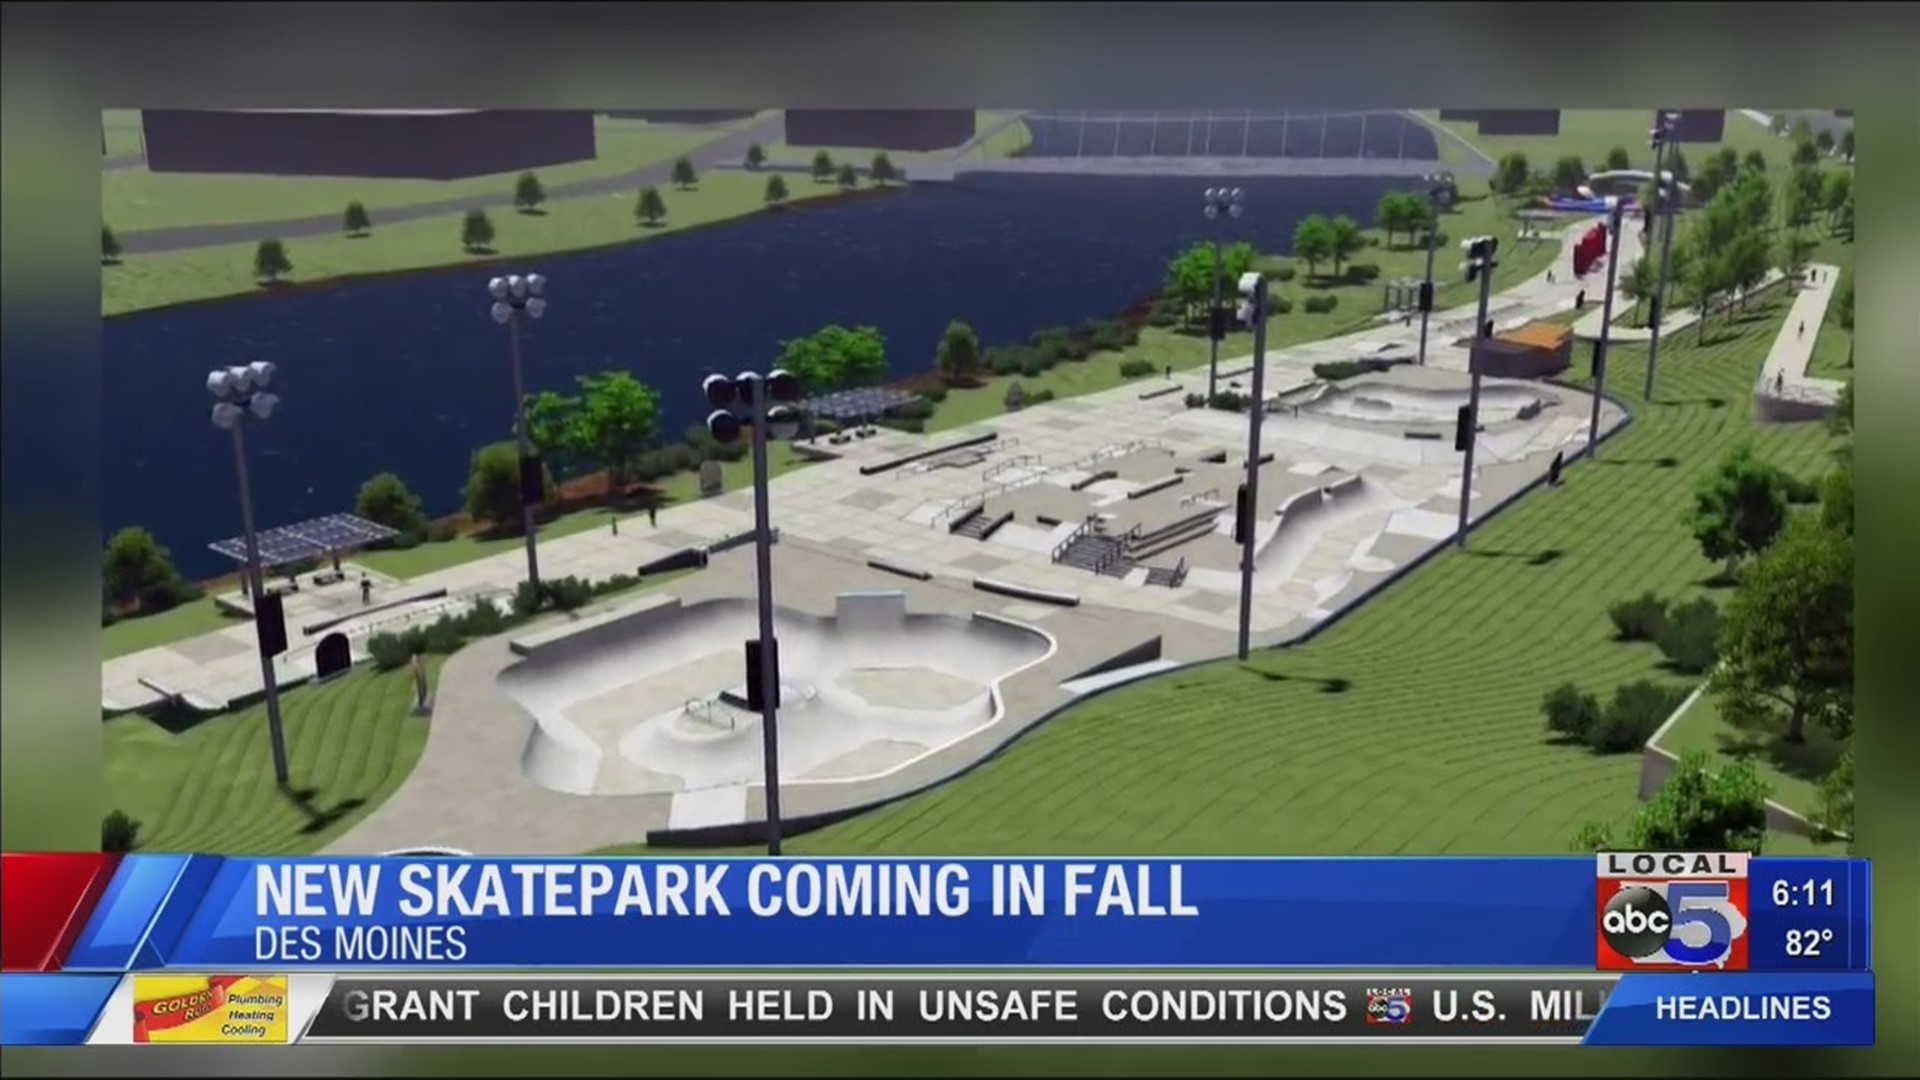 Des Moines to have largest skatepark in the U.S.